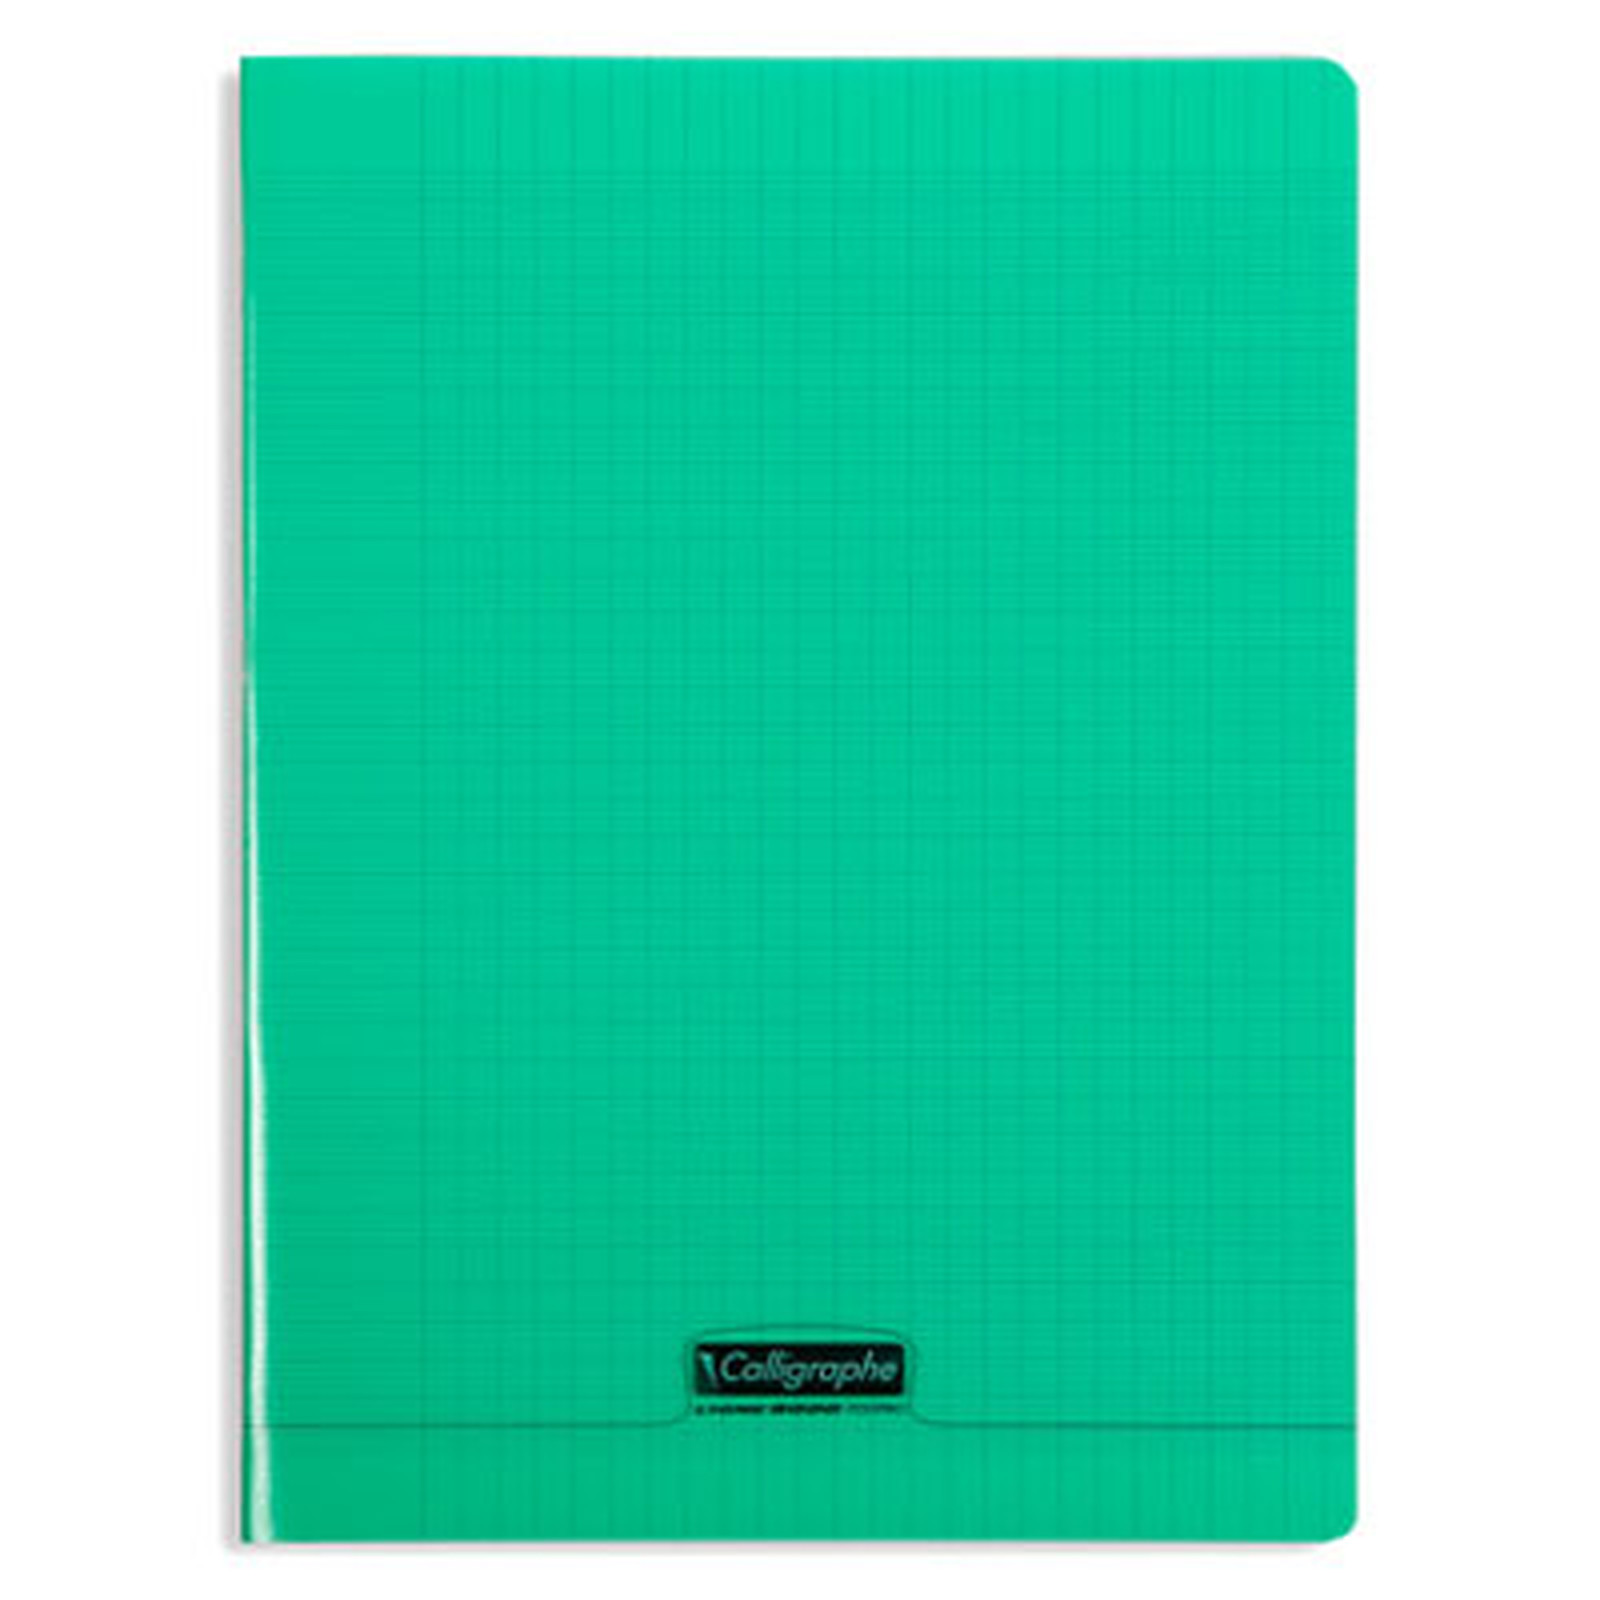 Calligraphe 8000 Polypro Cahier 96 pages 24 x 32 cm seyes grands carreaux Vert - Cahier Calligraphe